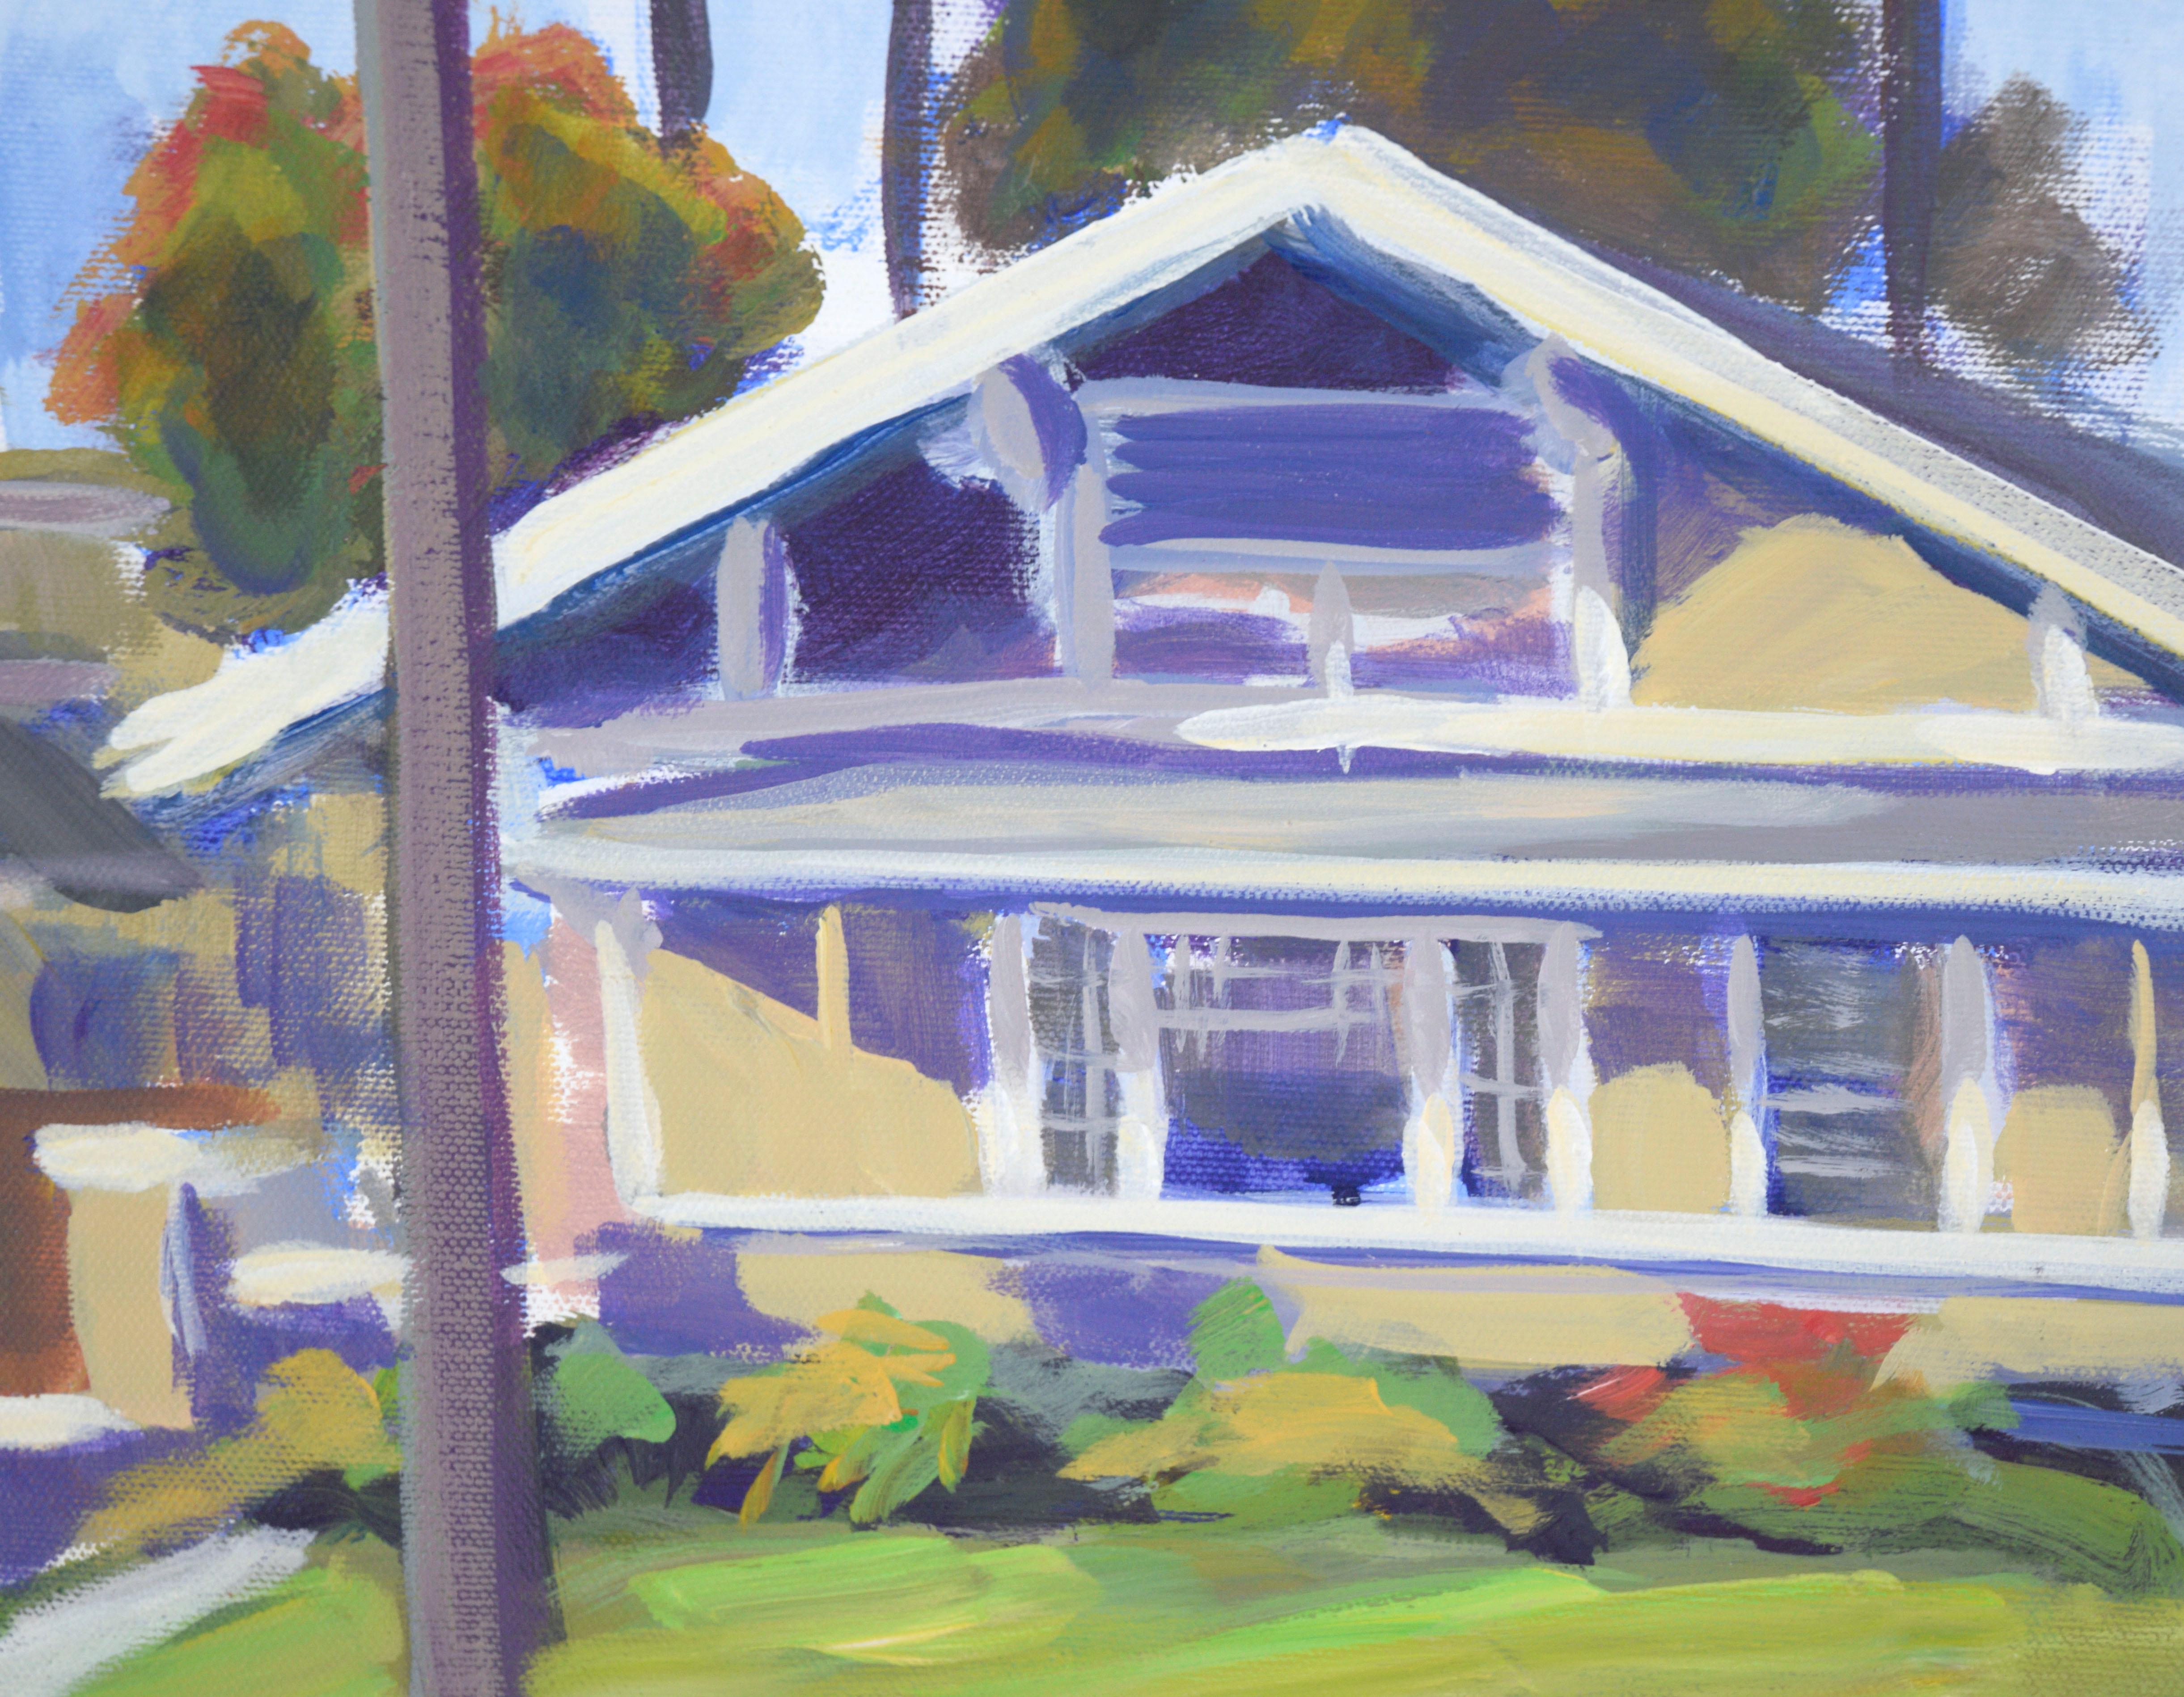 California Suburbs - Plein Aire Landscape in Acrylic on Canvas - American Impressionist Painting by Nick White